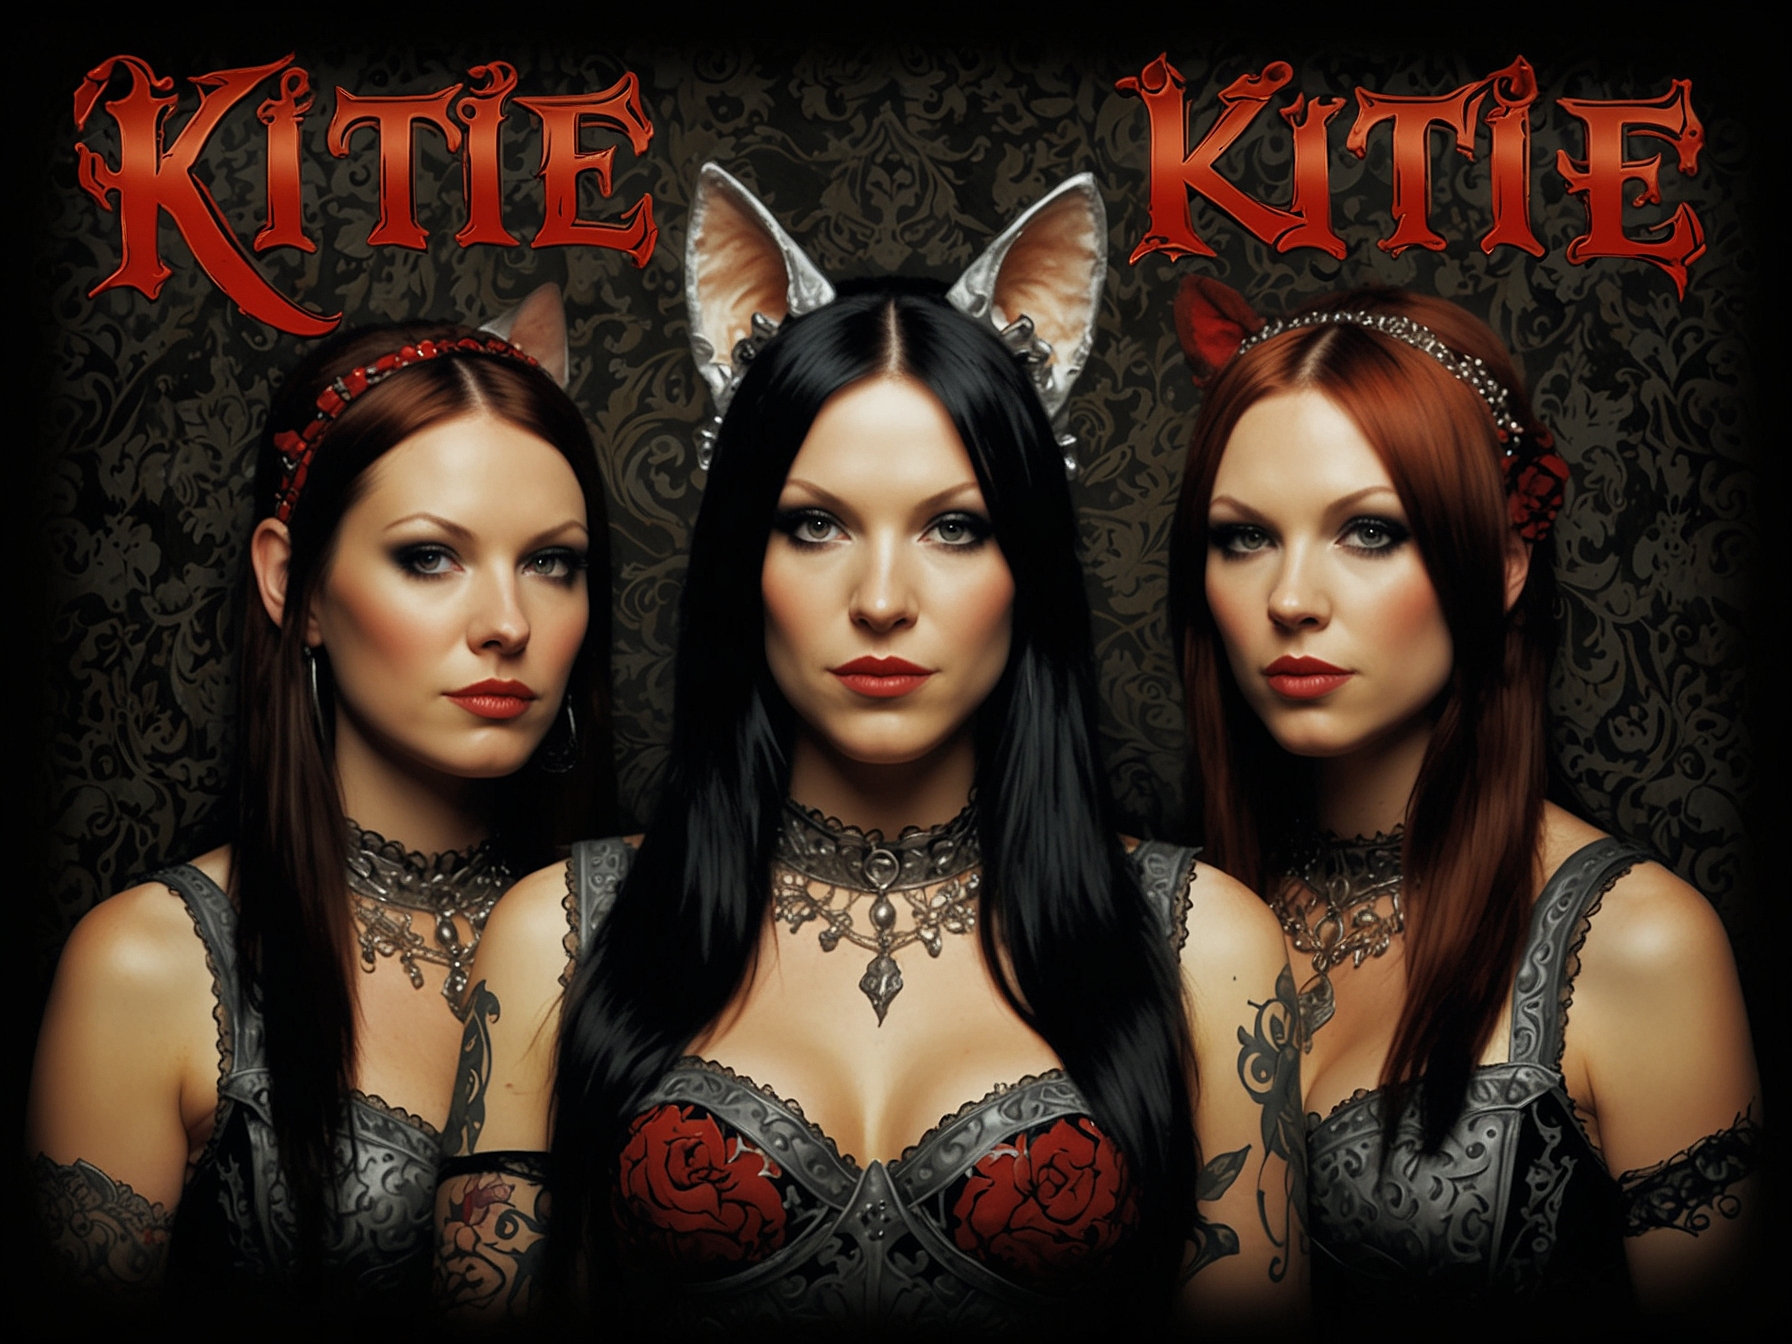 The album cover of Kittie's seventh studio album, featuring a bold and artistic design that reflects the band's defiant joy and pure love for the metal genre, capturing their renaissance.